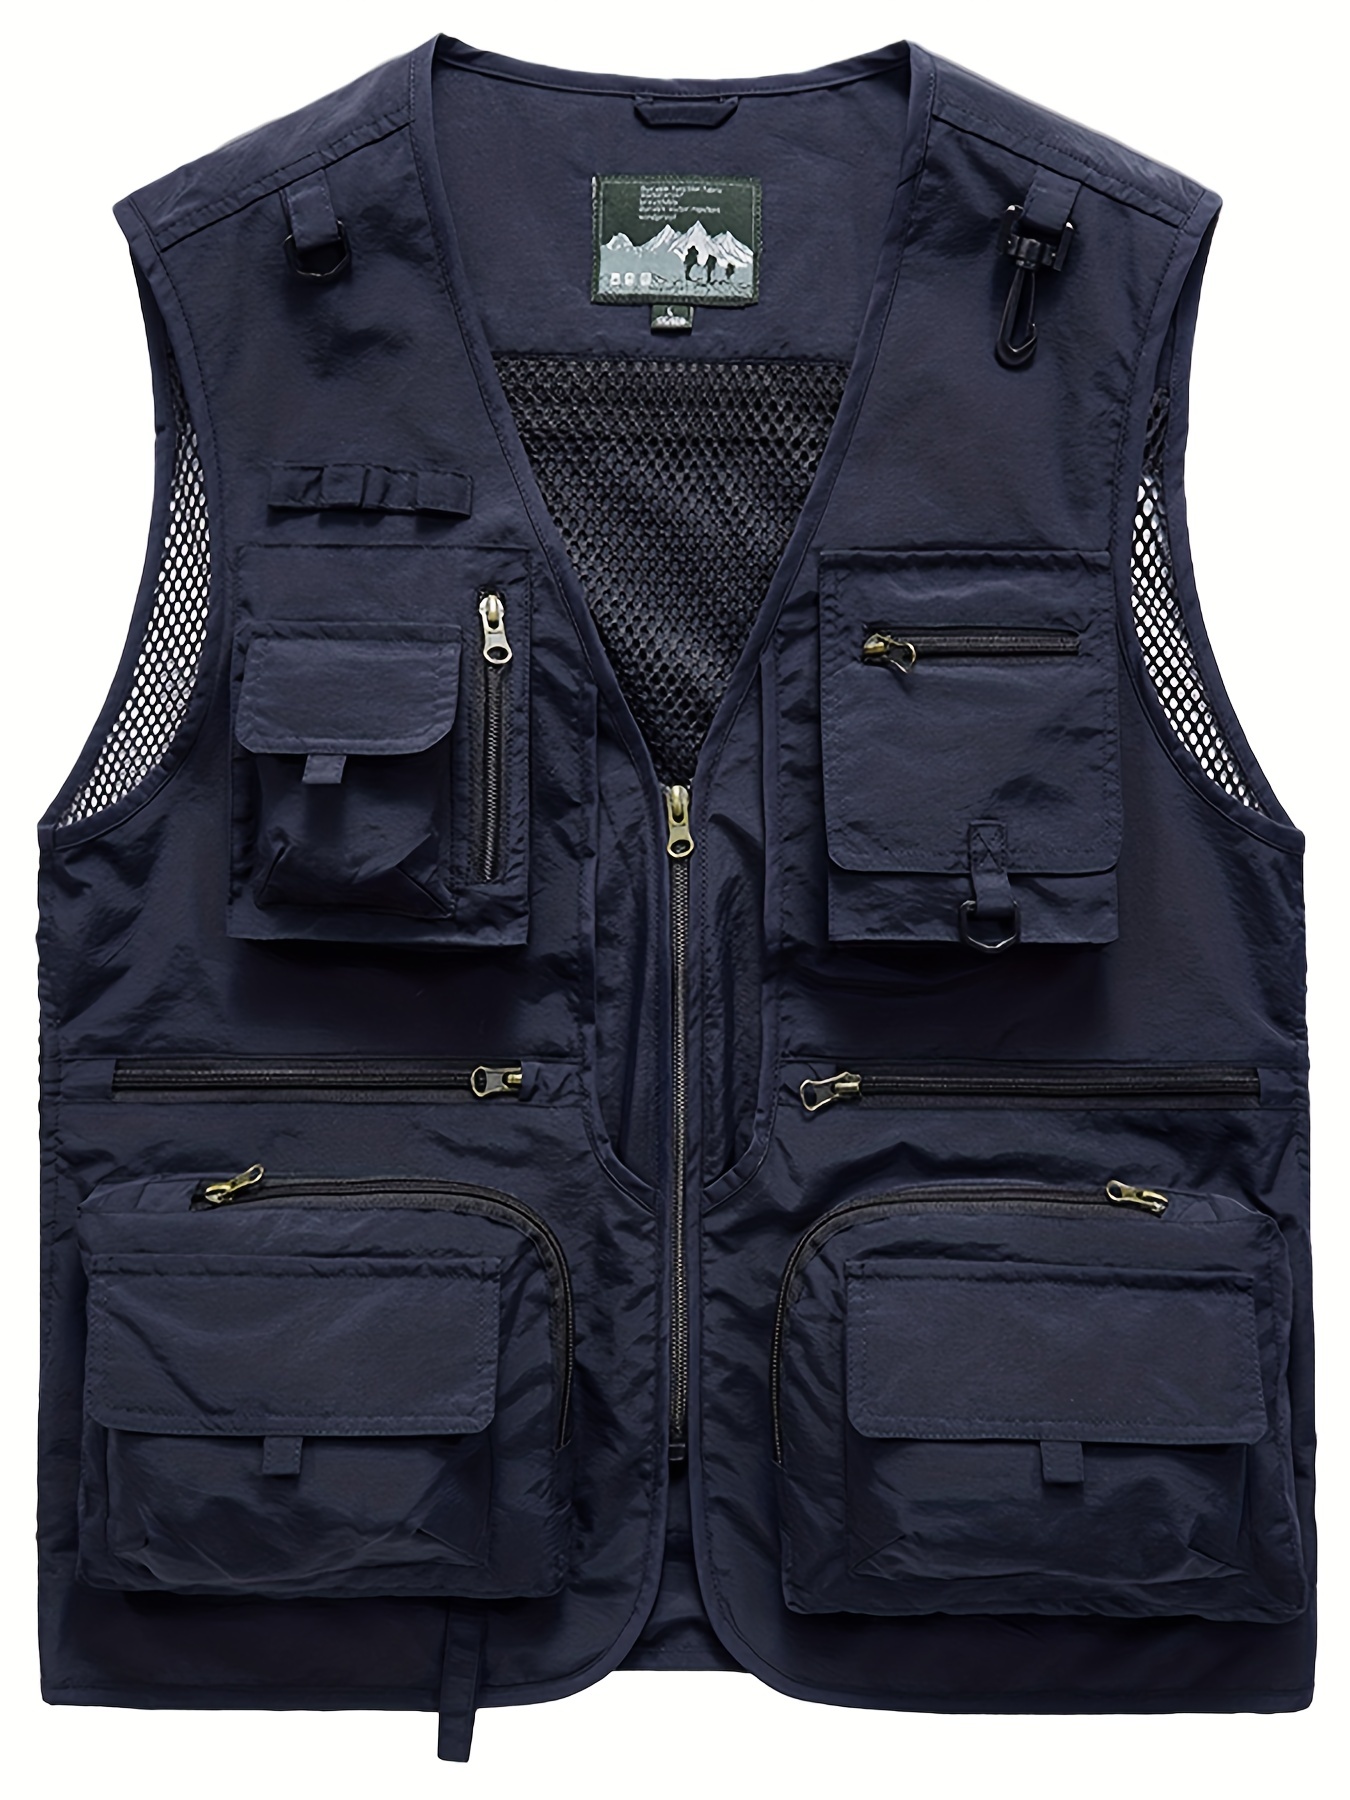 Mens Mesh Fishing Vest Breathable Summer for Cargo Vest Photography Outdoor